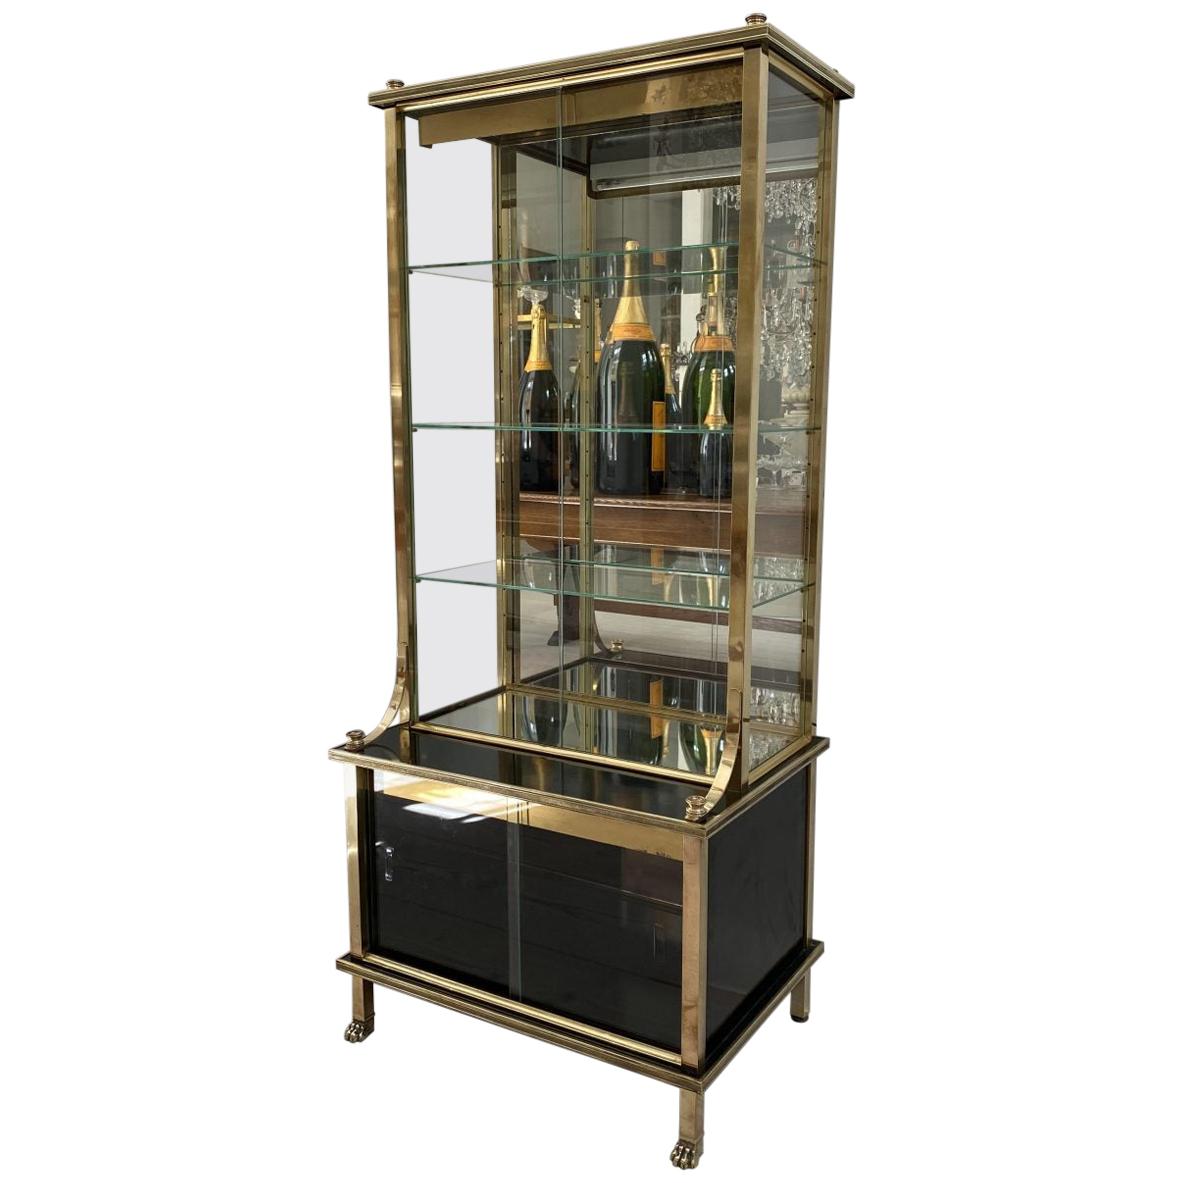 Striking Vintage Cabinet-Brass and Glass